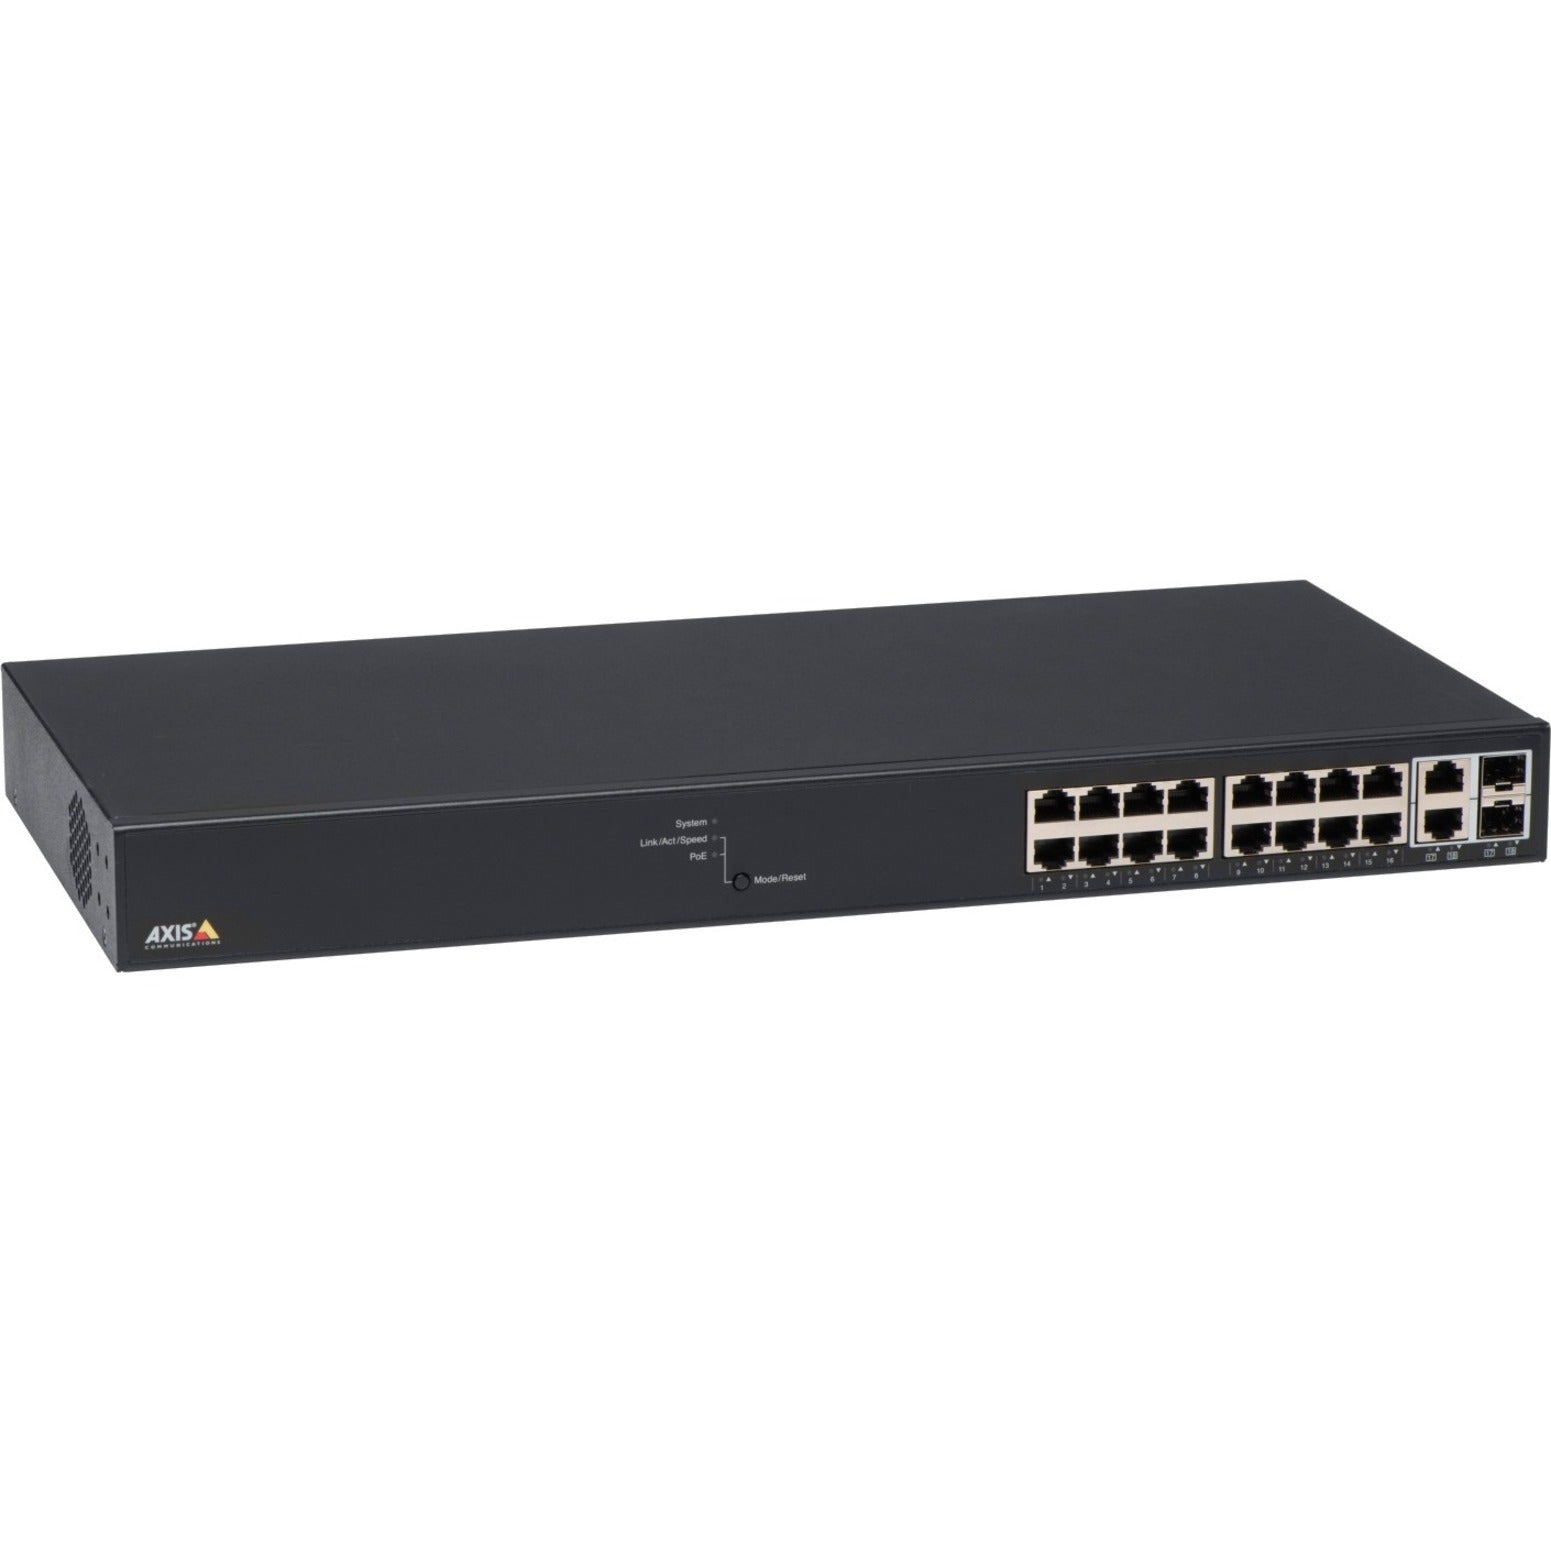 AXIS 5801-694 T8516 PoE+ Network Switch, 18 Gigabit Ethernet Ports, 2 SFP Slots